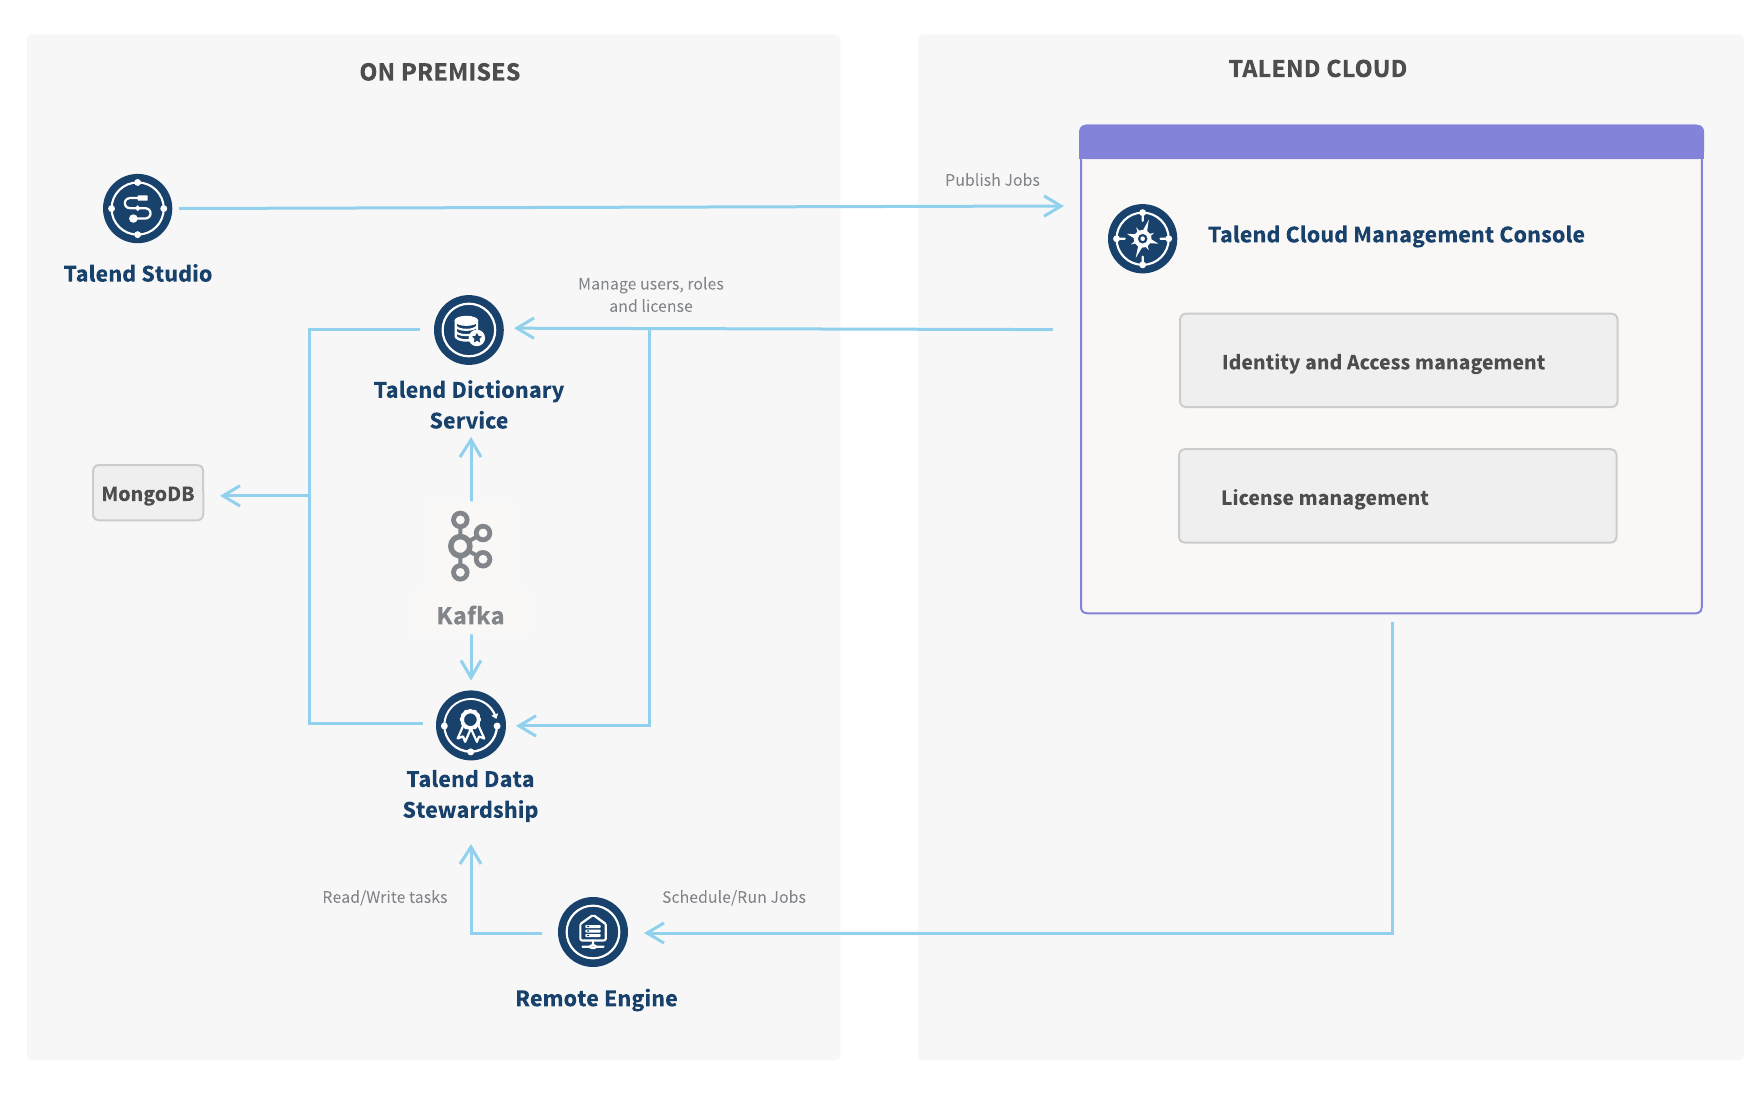 The diagram has two sections: on premises and Talend Cloud. In the on premises section, Talend Remote Engine receives Job run scheduling instructions from Talend Management Console, and reads and writes tasks to Talend Data Stewardship. Talend Data Stewardship communicates with Talend Dictionary Service using Kafka. In the Talend Cloud section, Talend Data Stewardship users, roles, and license are managed from Talend Management Console.